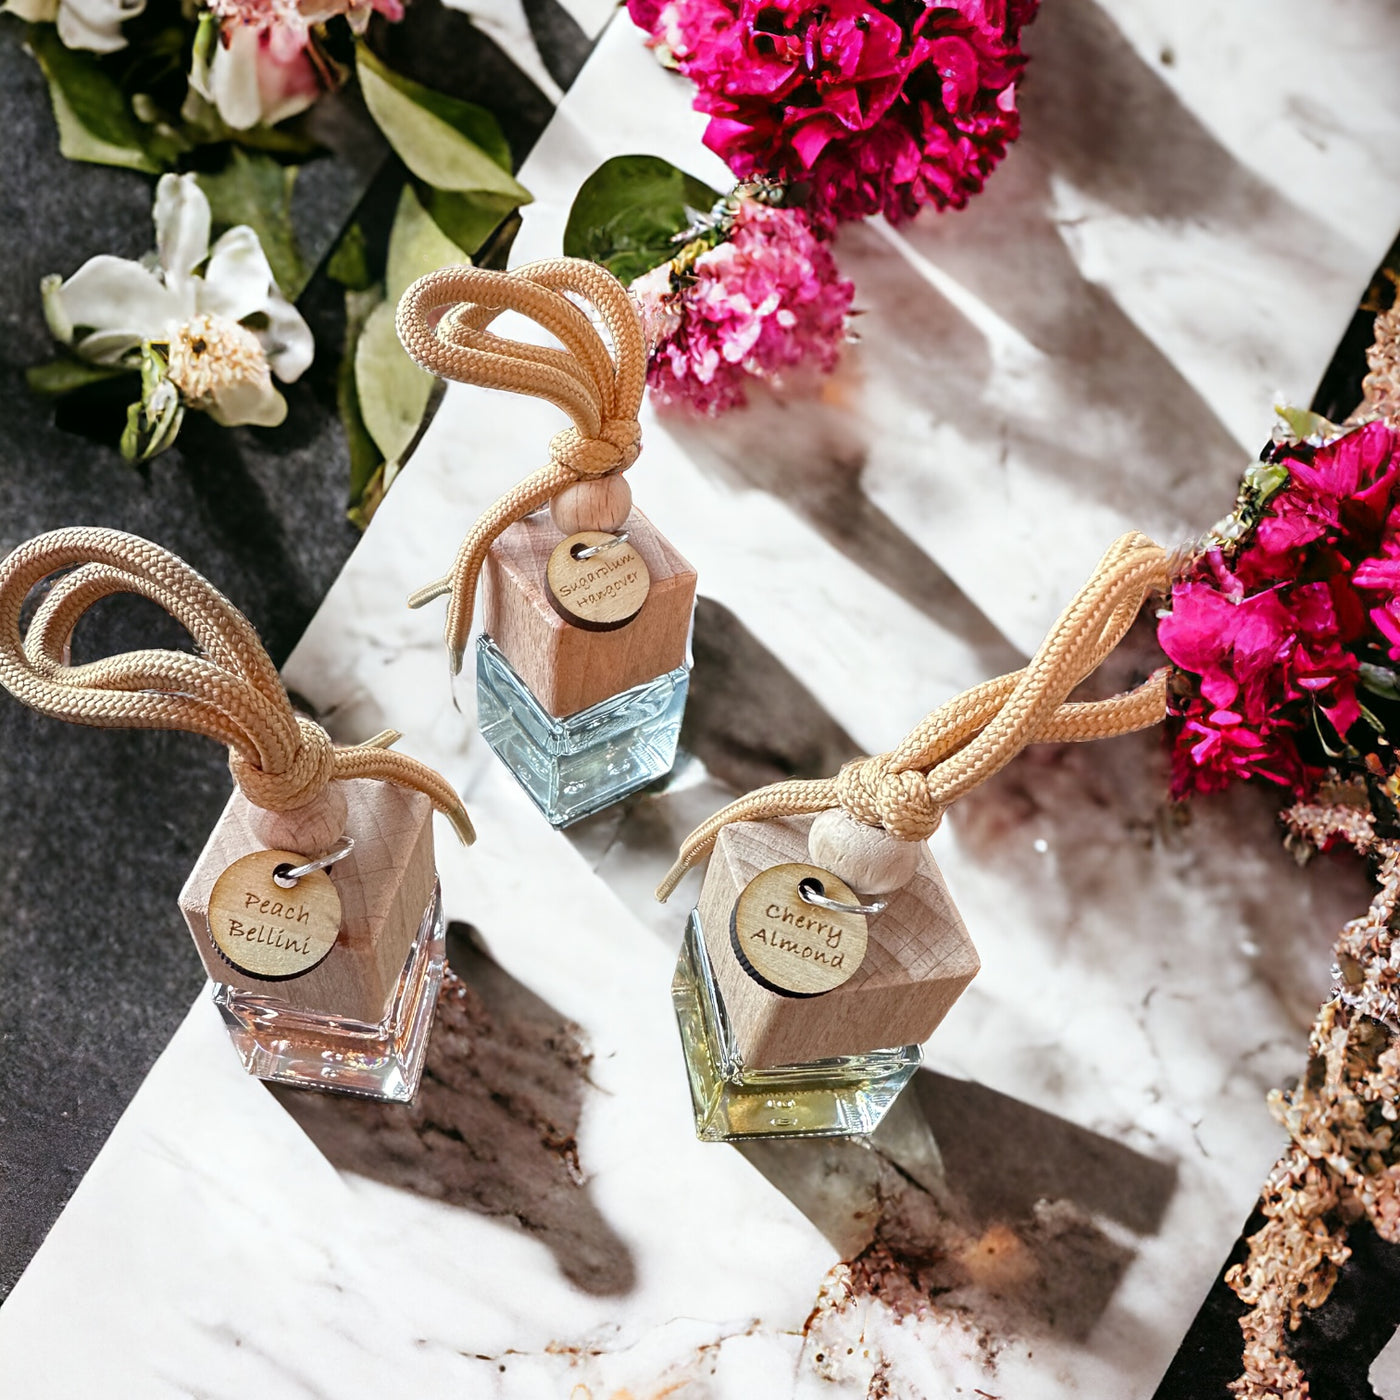 Modern & Trendy Air Fresheners-Brittany Carl-Shop Anchored Bliss Women's Boutique Clothing Store